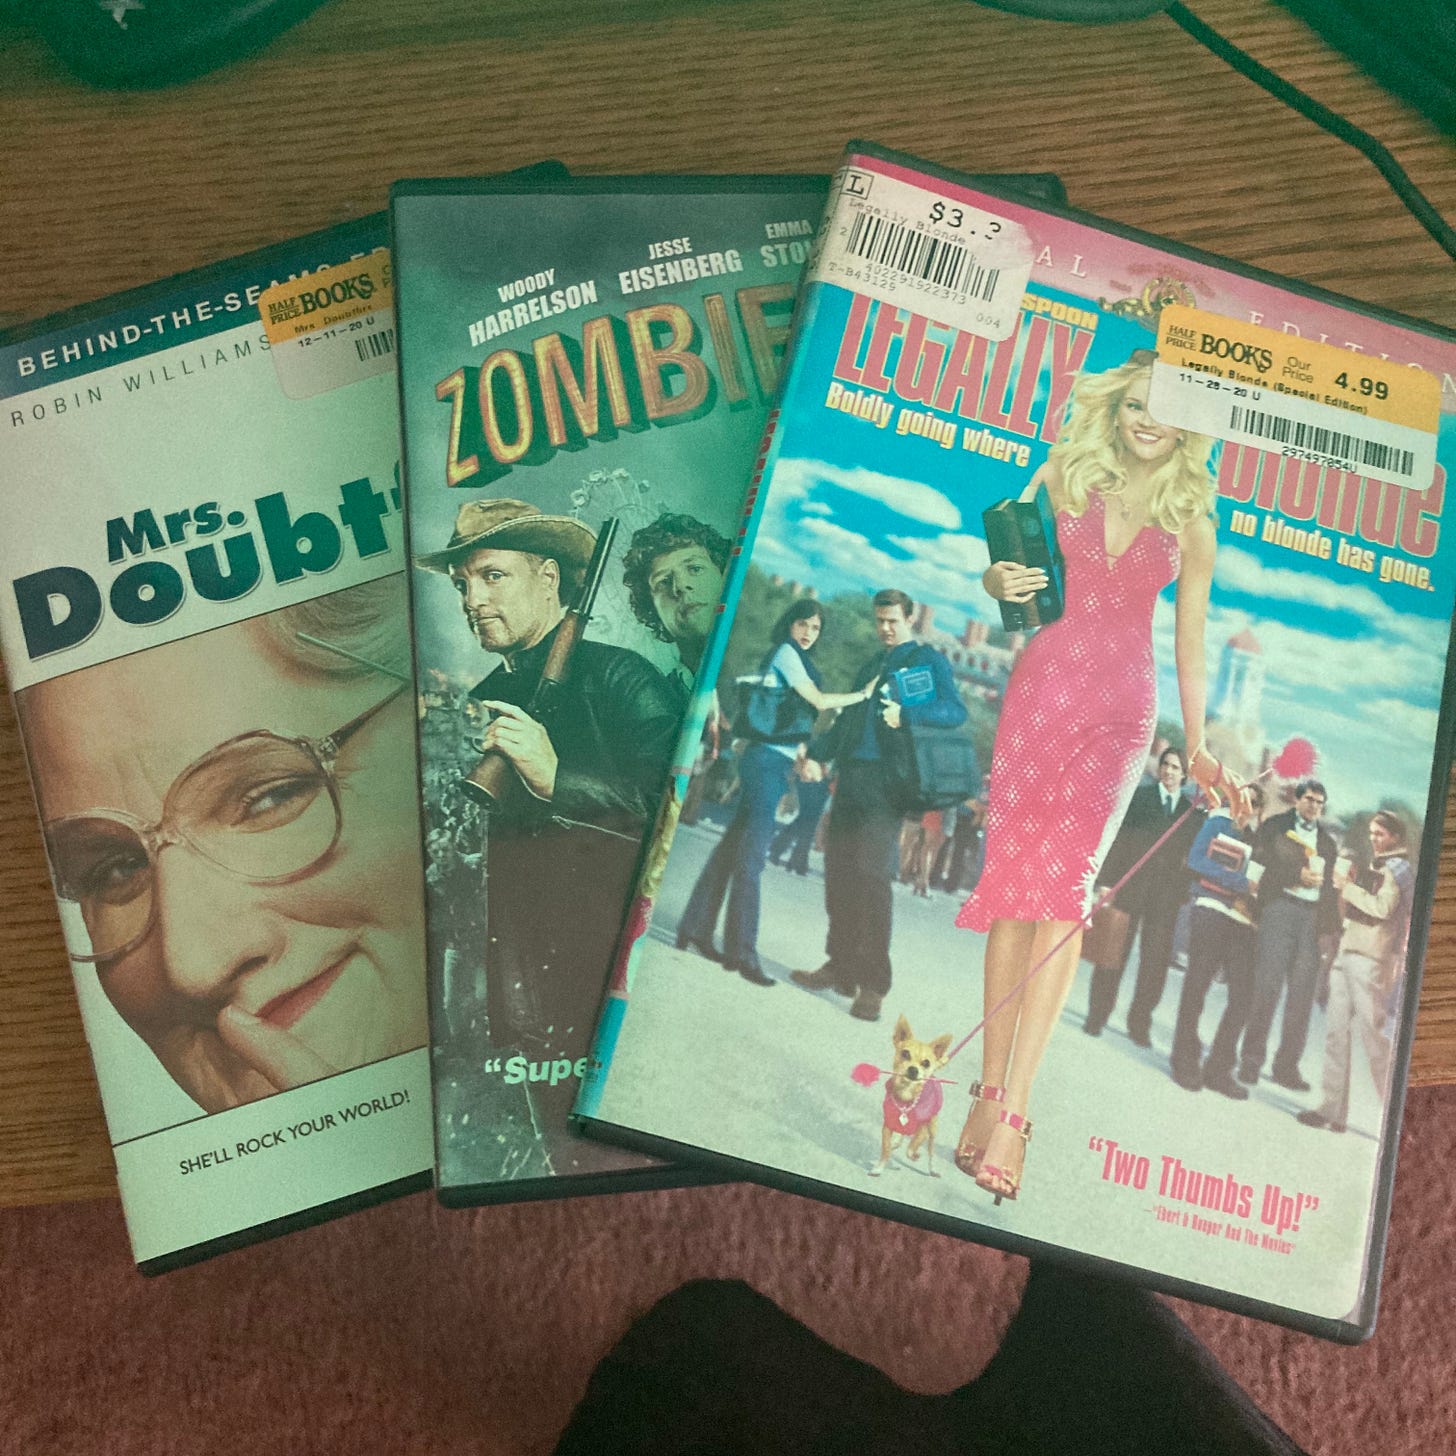 Image Description: Three DVD boxes lay on top of each other, fanned out so the covers are partially visible. These movies from left to right are Mrs. Doubtfire, Zombieland, and Legally Blonde.